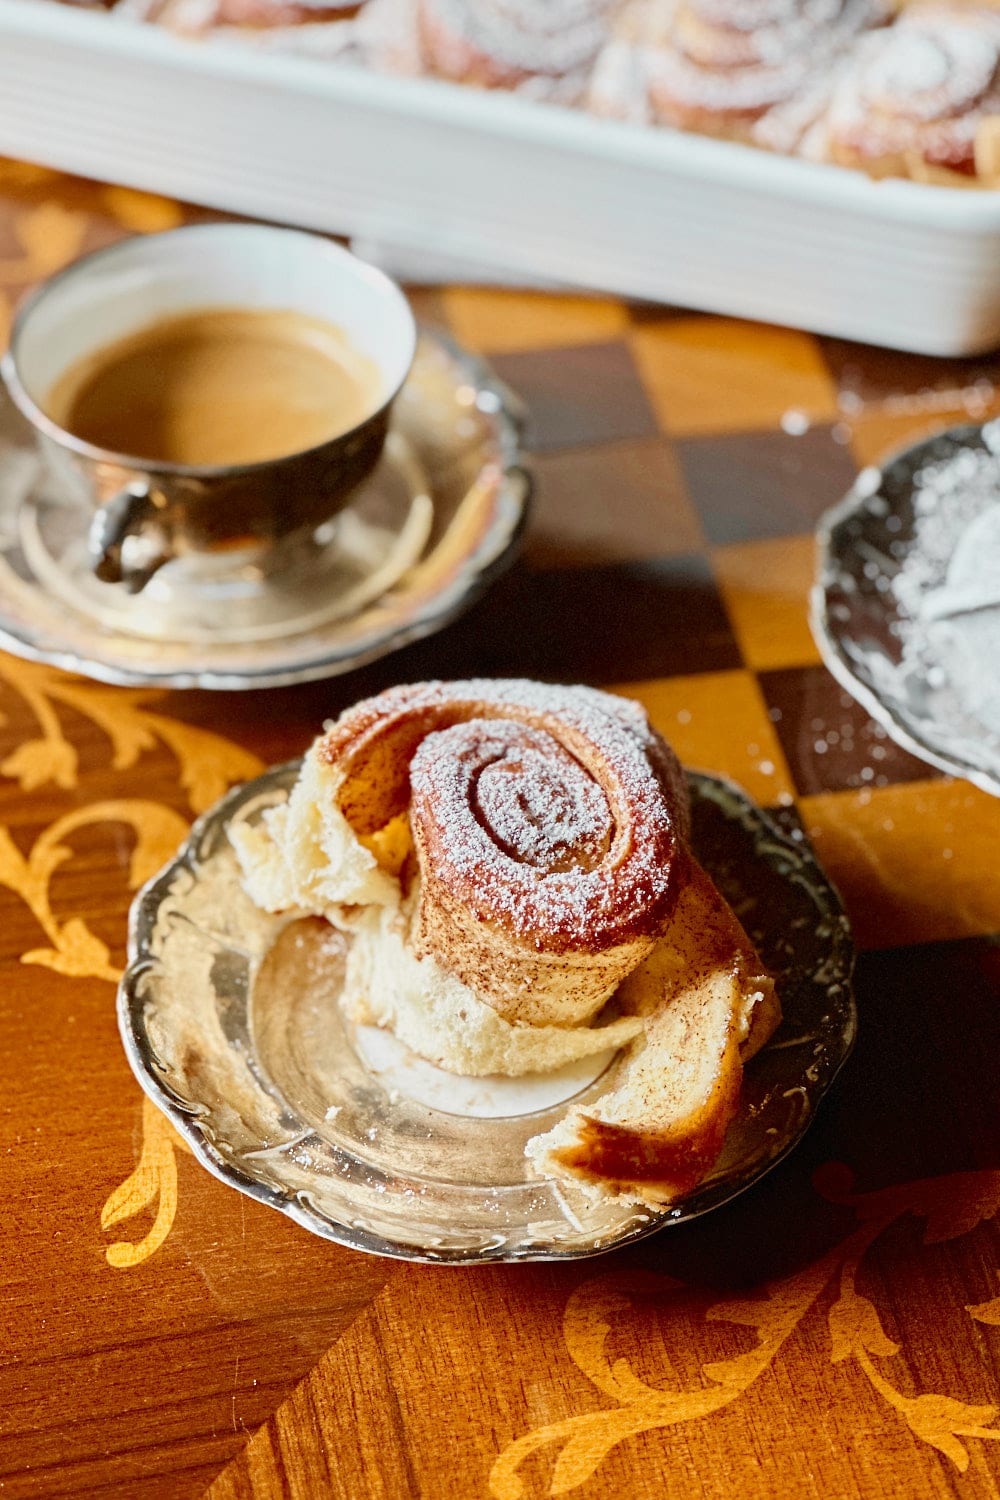 A sourdough cinnamon bun dusted with powdered sugar and a cup of coffee next to it.